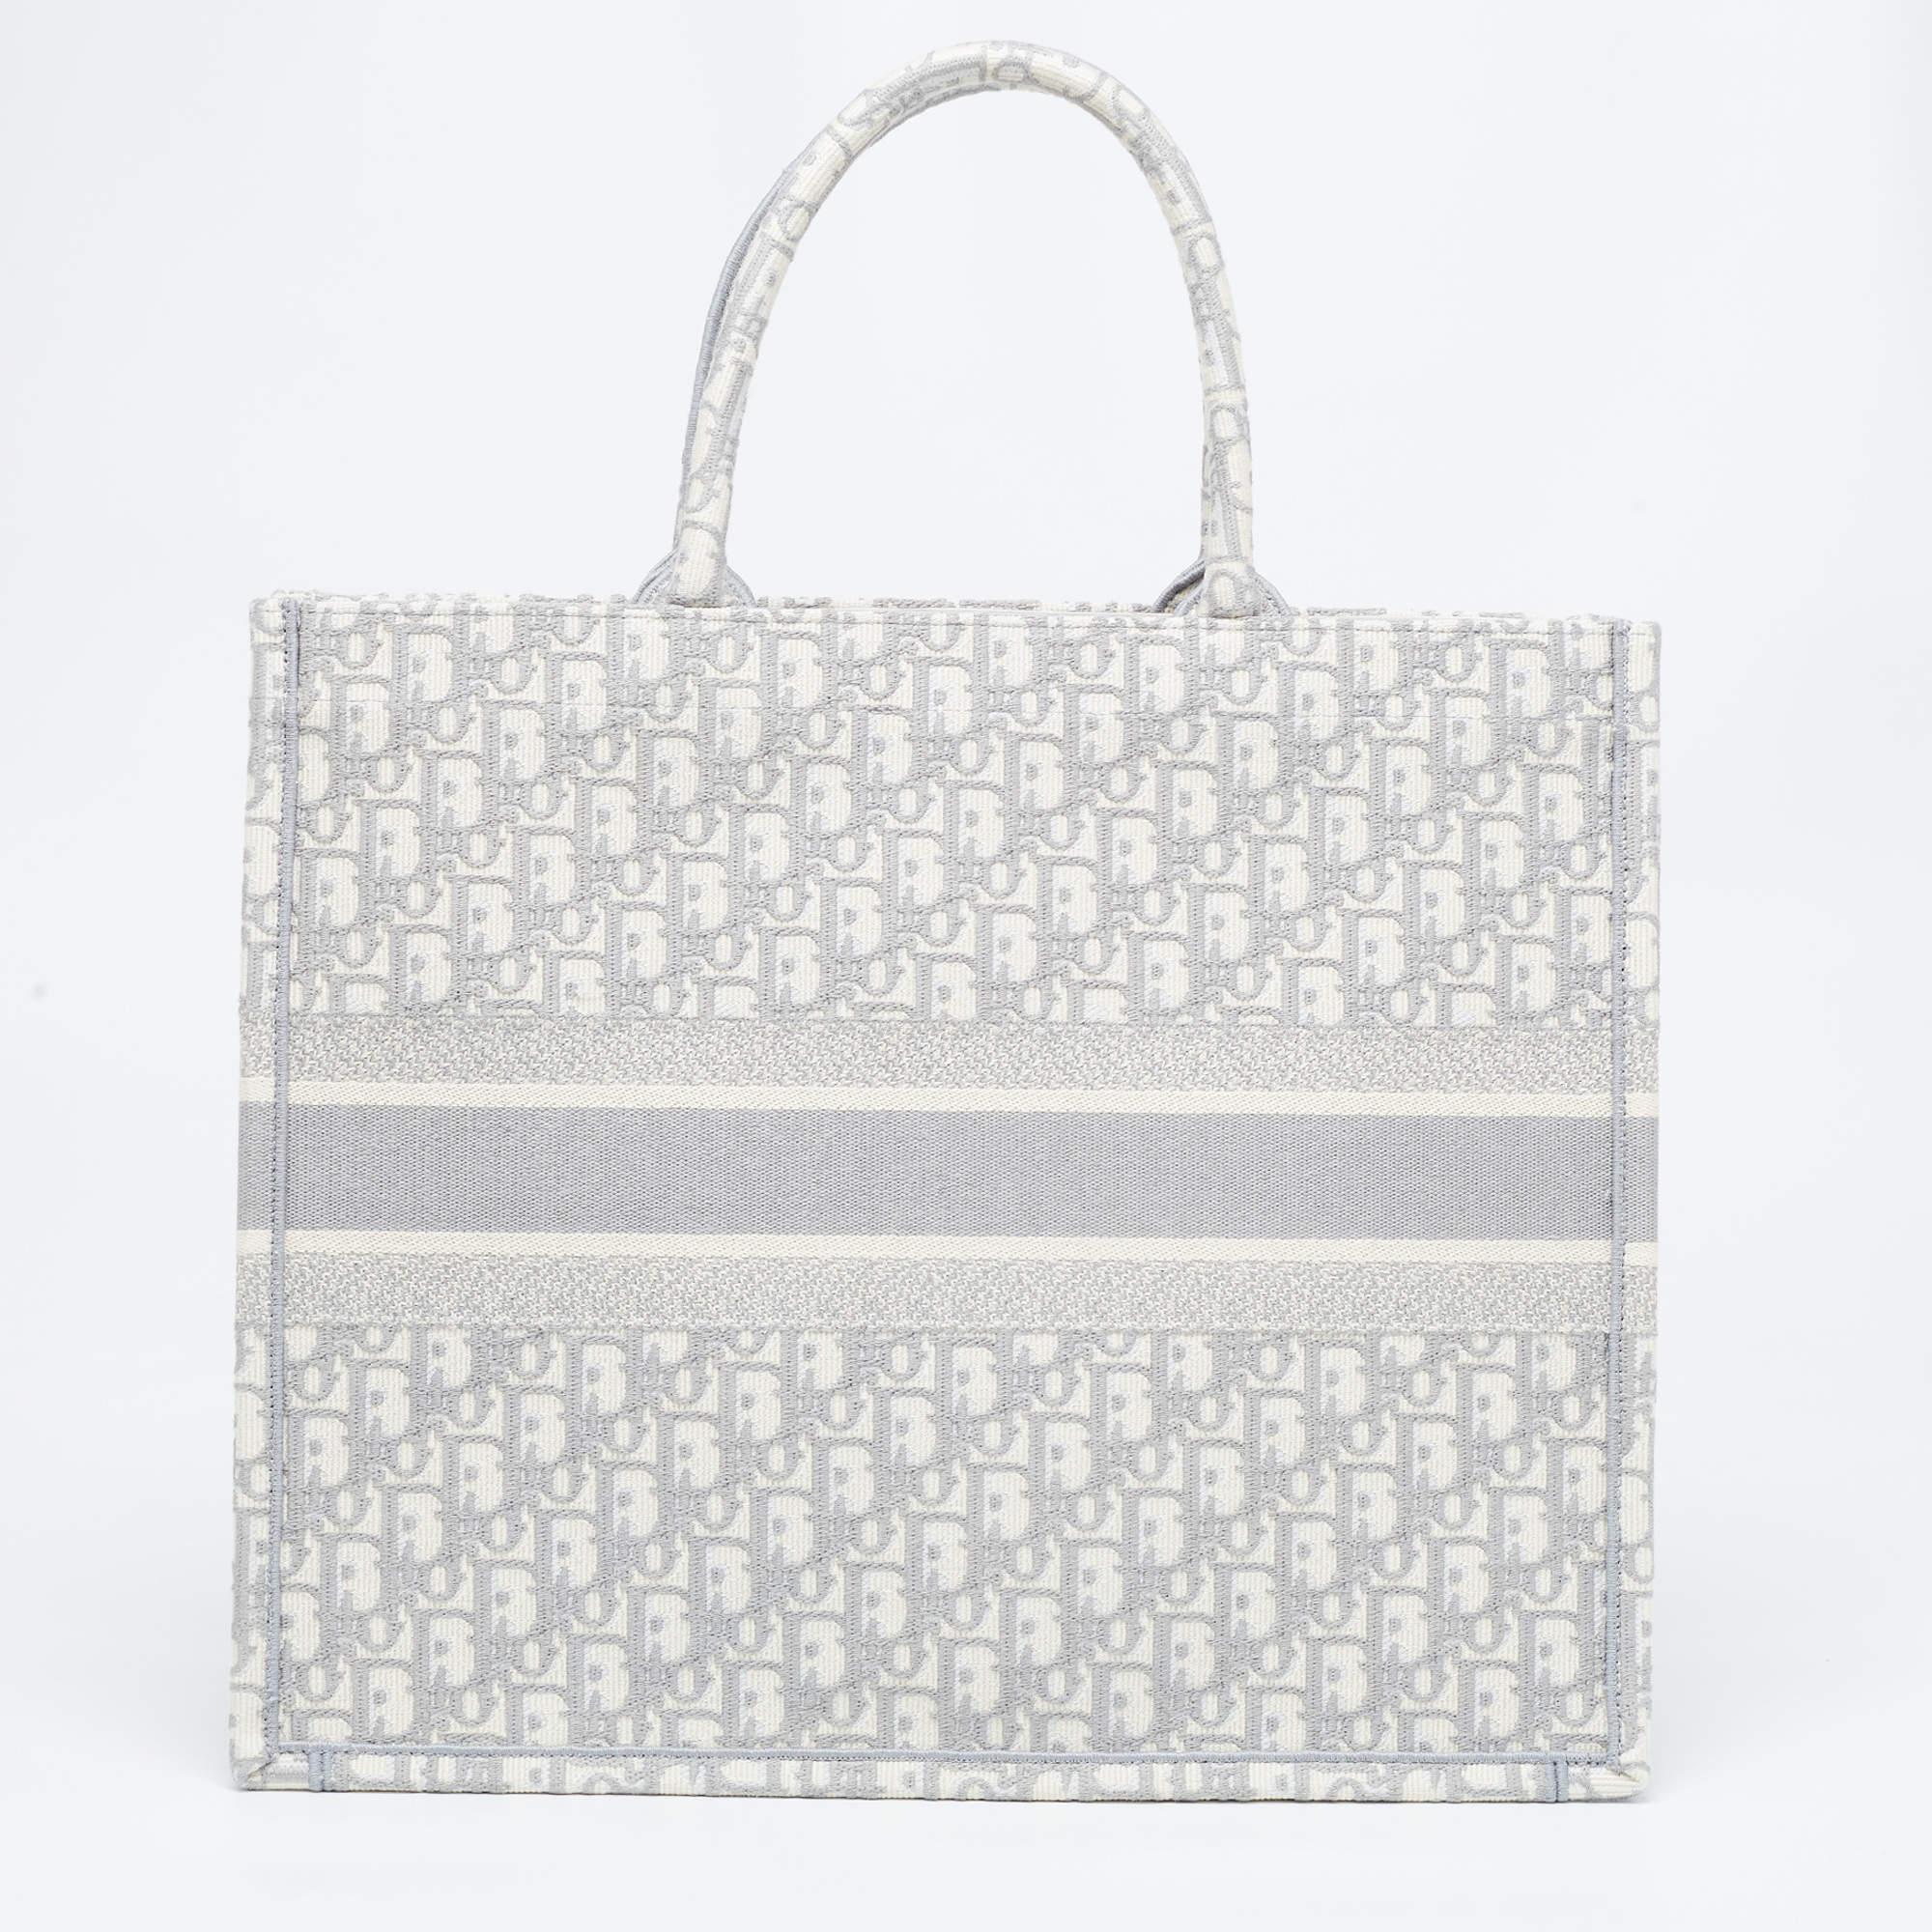 Designed by Maria Grazia Chiuri, the Dior Book Tote is a travel accessory for people with style. The bag here is crafted using canvas into a beautiful structure and covered in --- all over. Two handles, the 'Christian Dior' signature, and a spacious